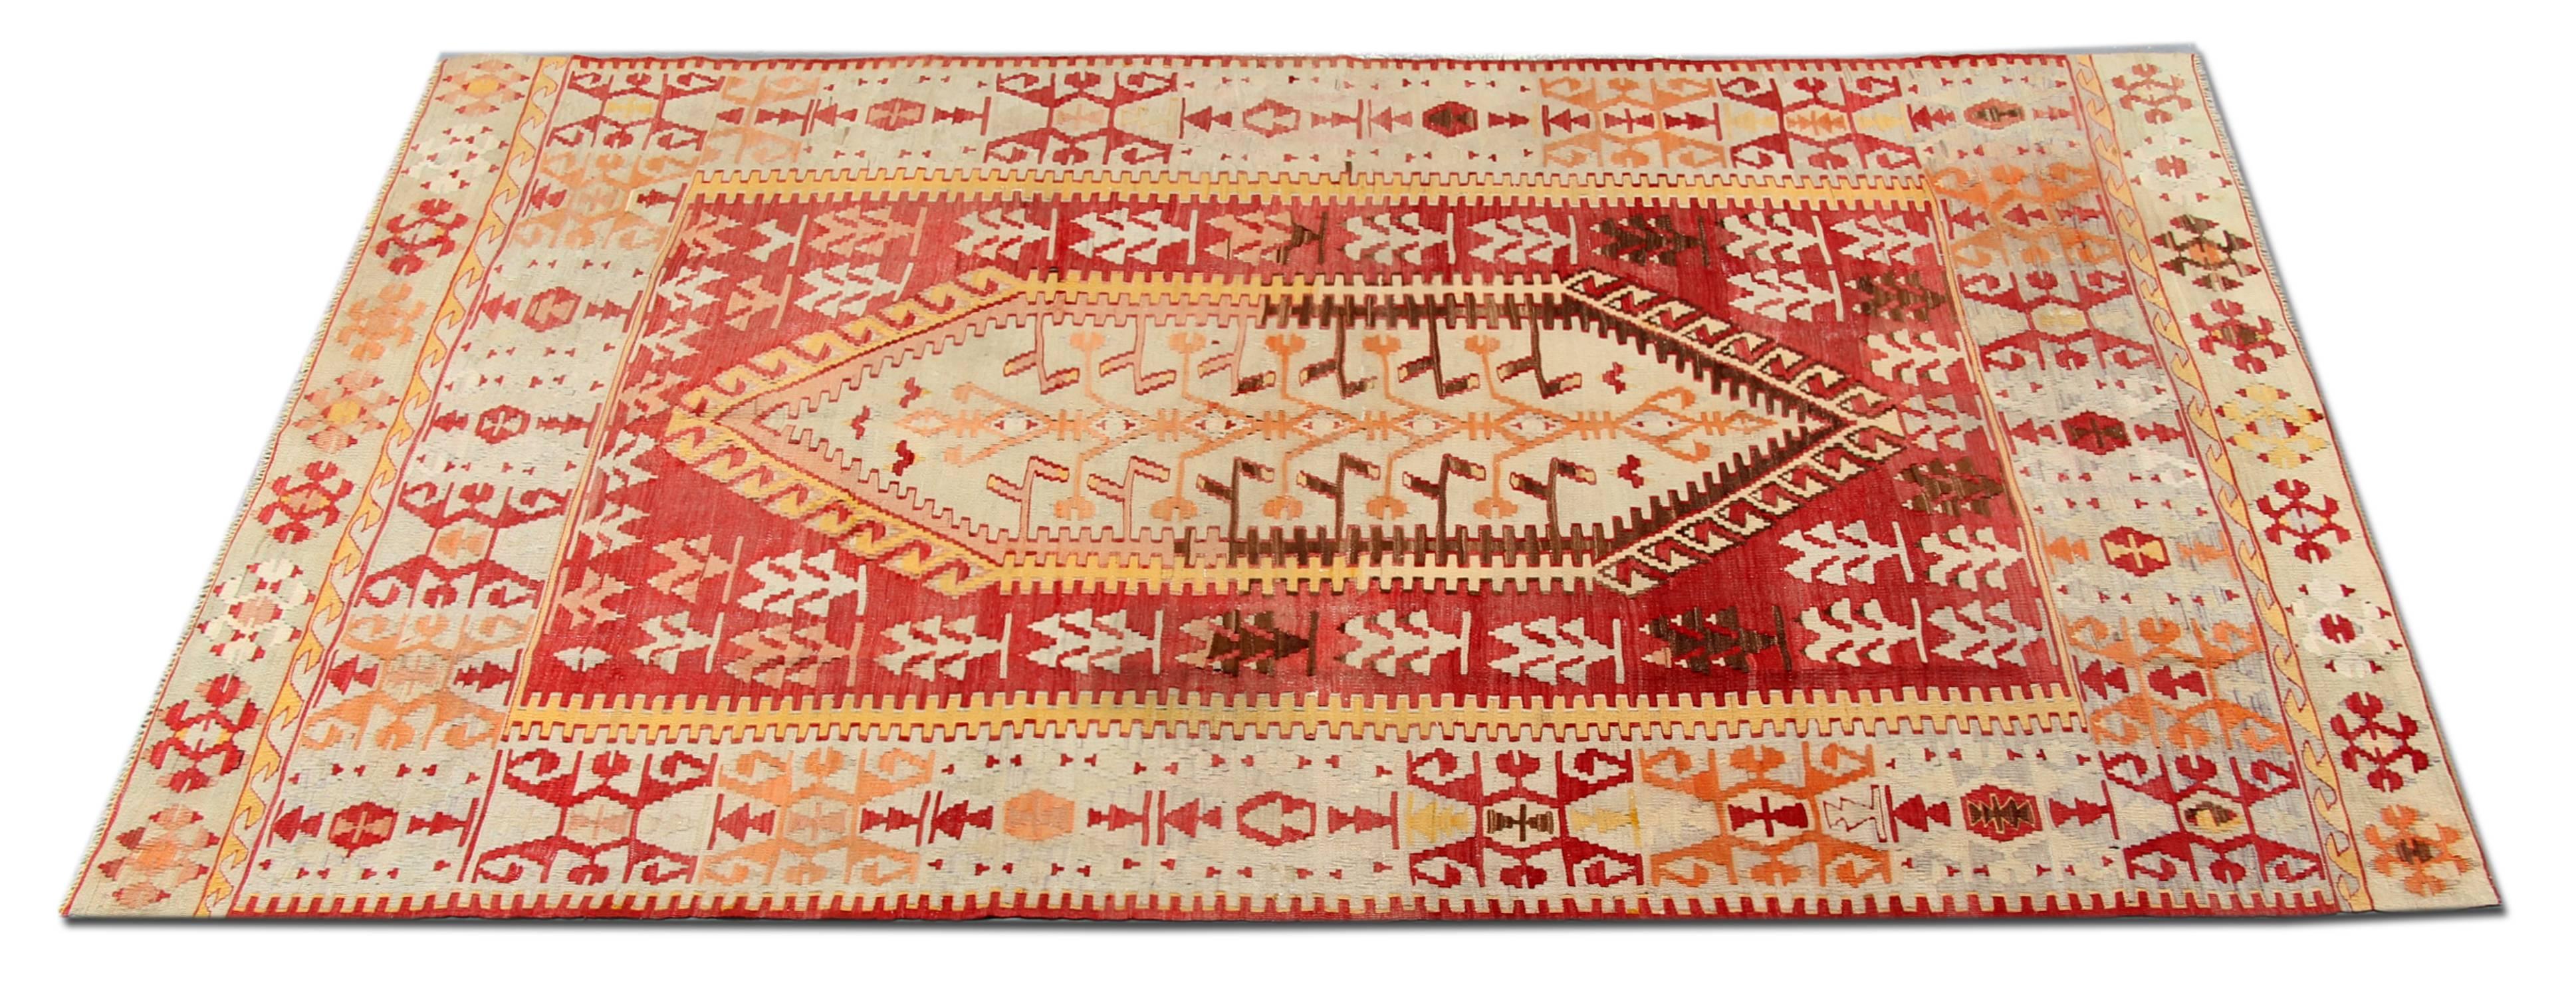 This Red Rug is Anatolian flat-weave rug has red, yellow, orange, white and brown colors. This Floor rug has a wide red border with repeating patterns on it. Turkish carpets would complement your home as living room rugs. These patterned rugs look